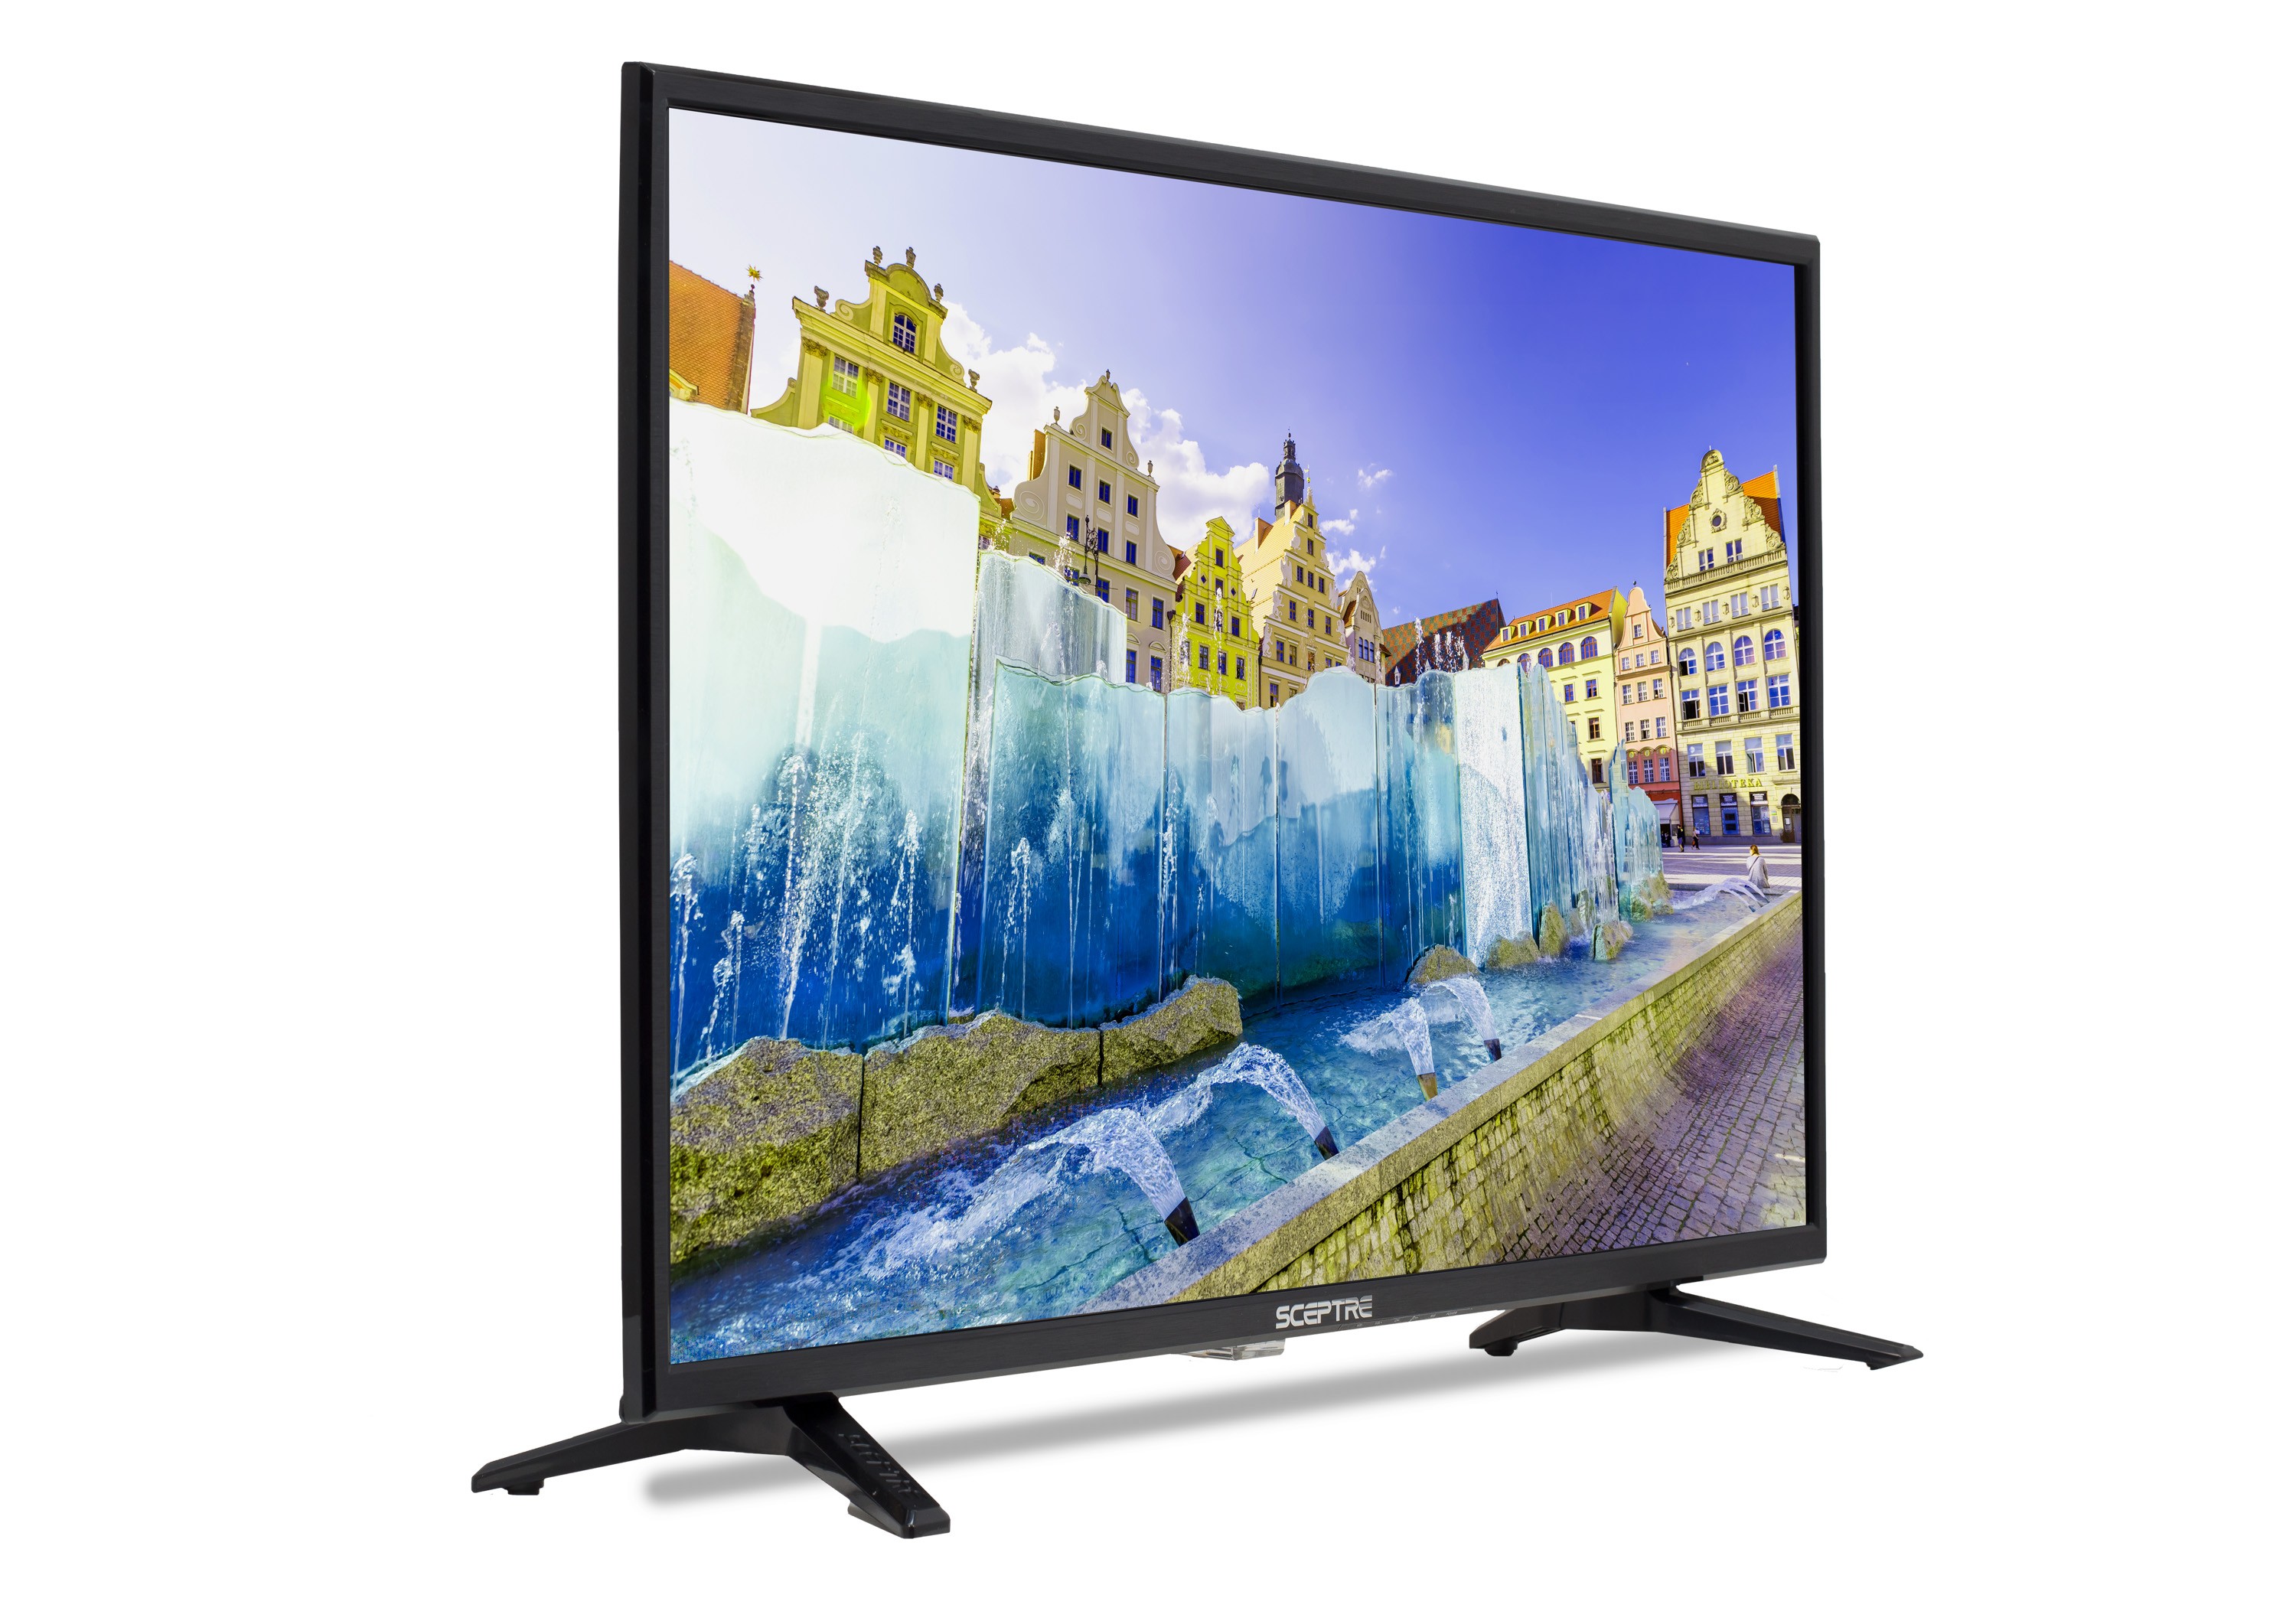 Sceptre 32" Class FHD (1080P) LED TV (E325BD-F) with Built-in DVD Player - image 2 of 4